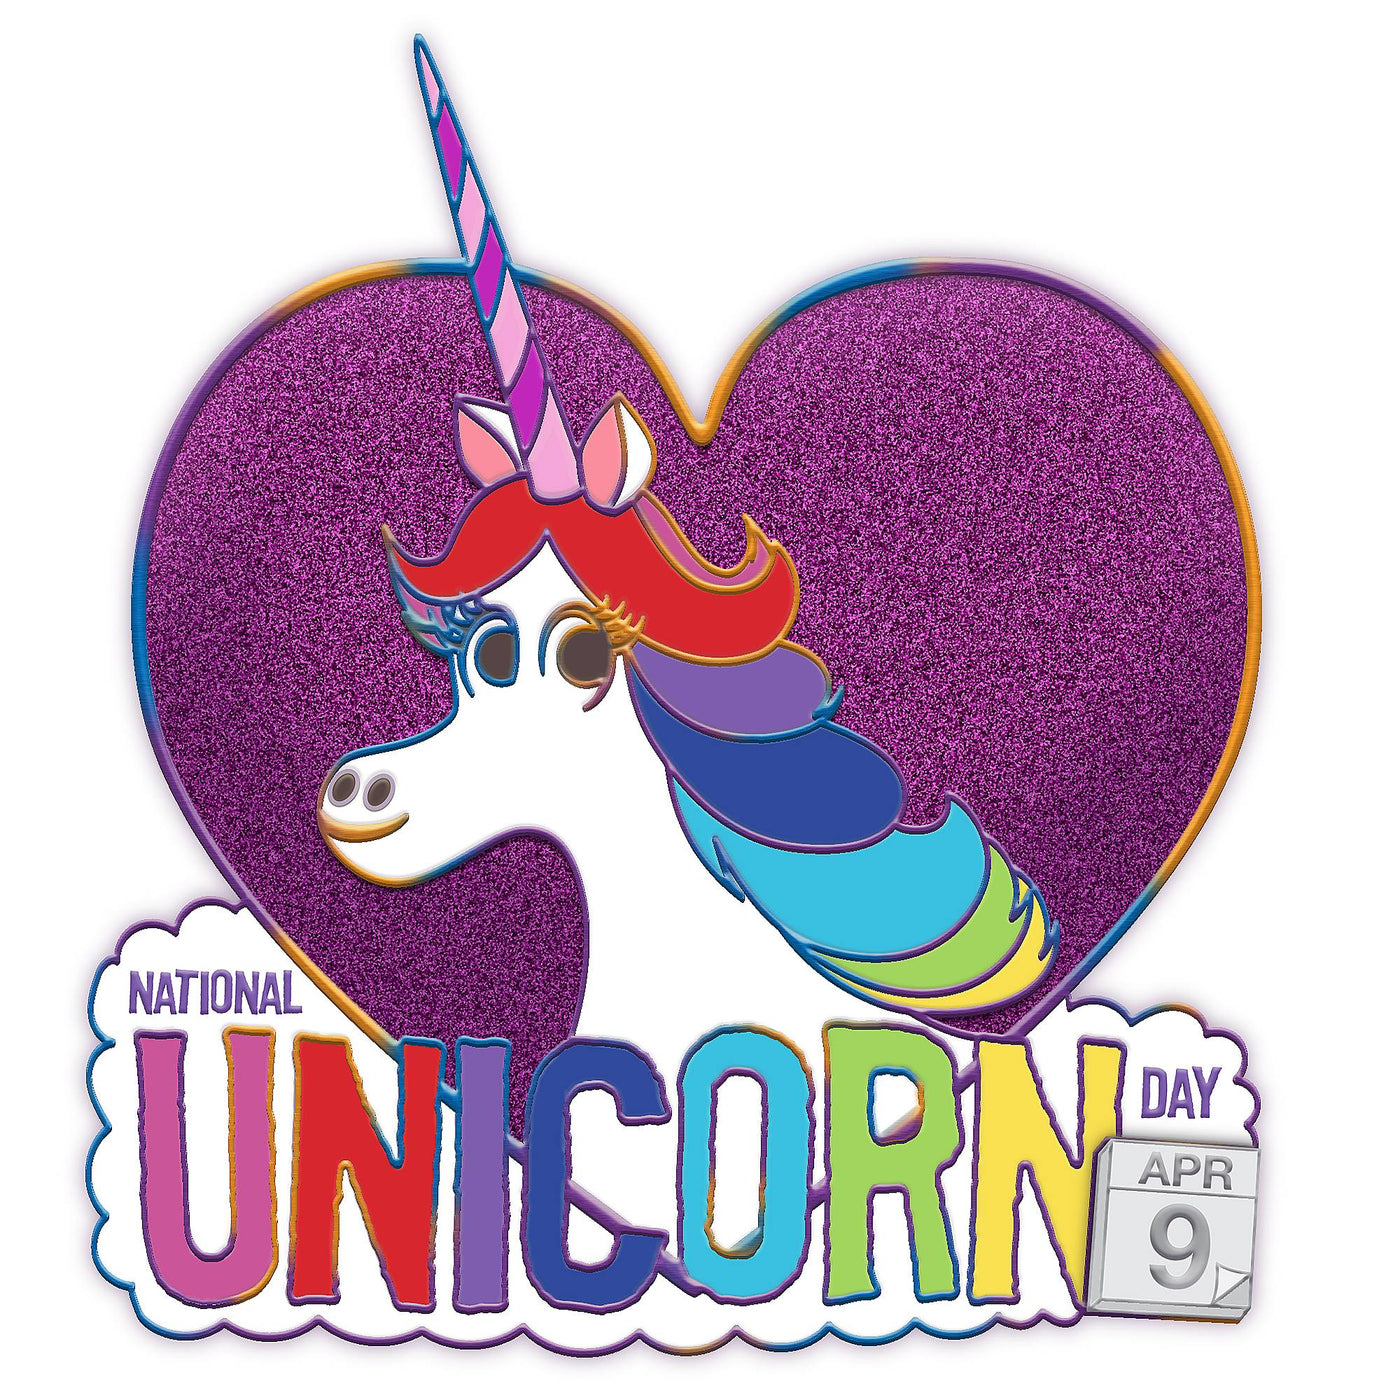 Disney Inside Out National Rainbow Unicorn Day 2020 Pin Limited New with Card